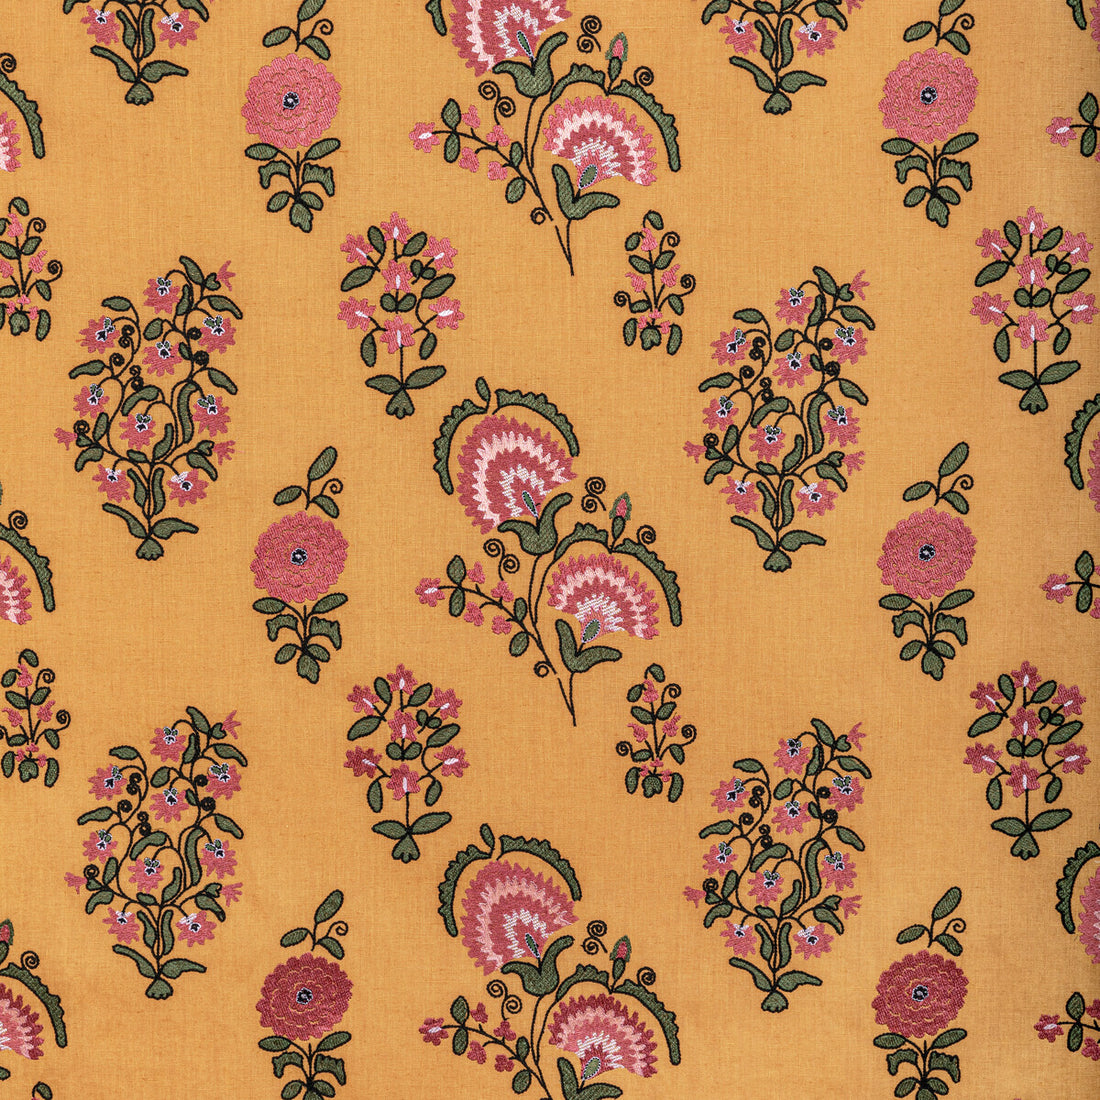 Mead Embroidery fabric in saffron/petal color - pattern 2022112.417.0 - by Lee Jofa in the Bunny Williams Arcadia collection